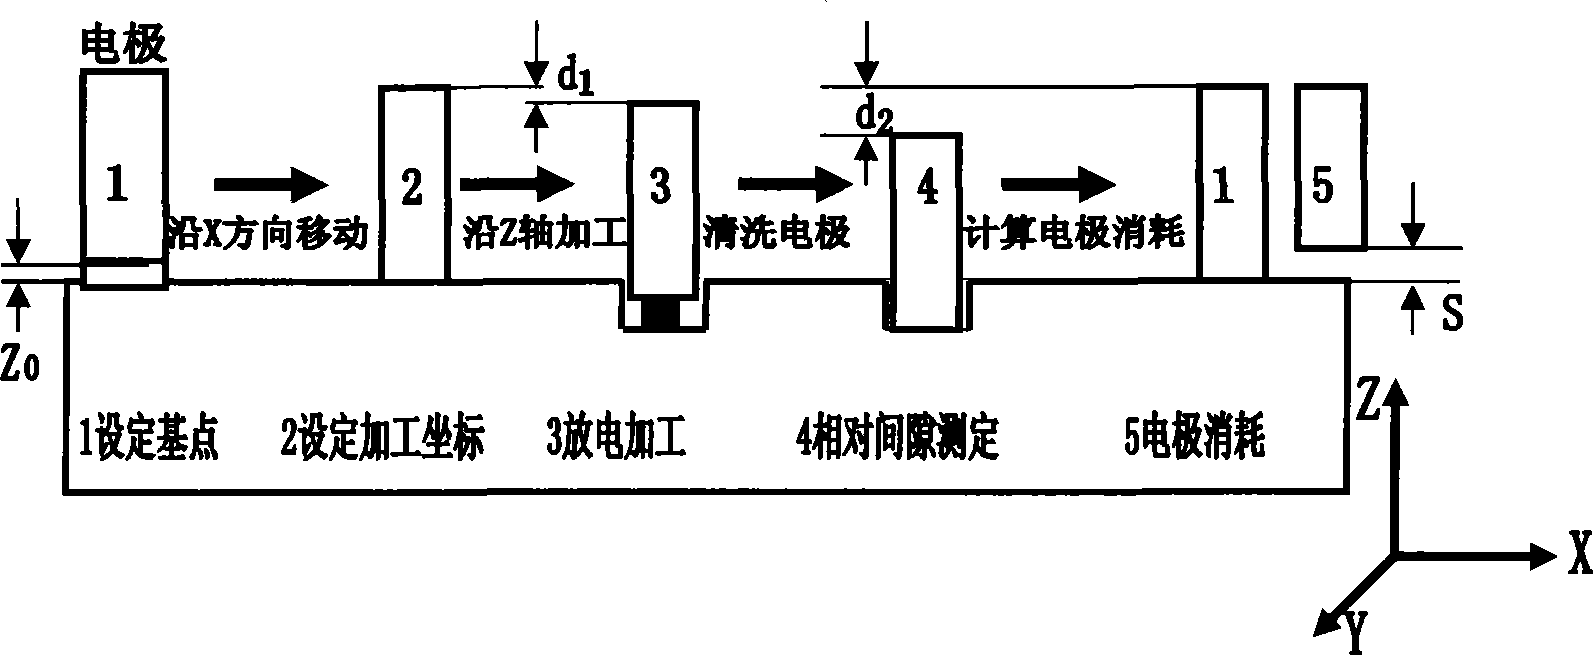 Measurement method of electro discharge machining gapping place